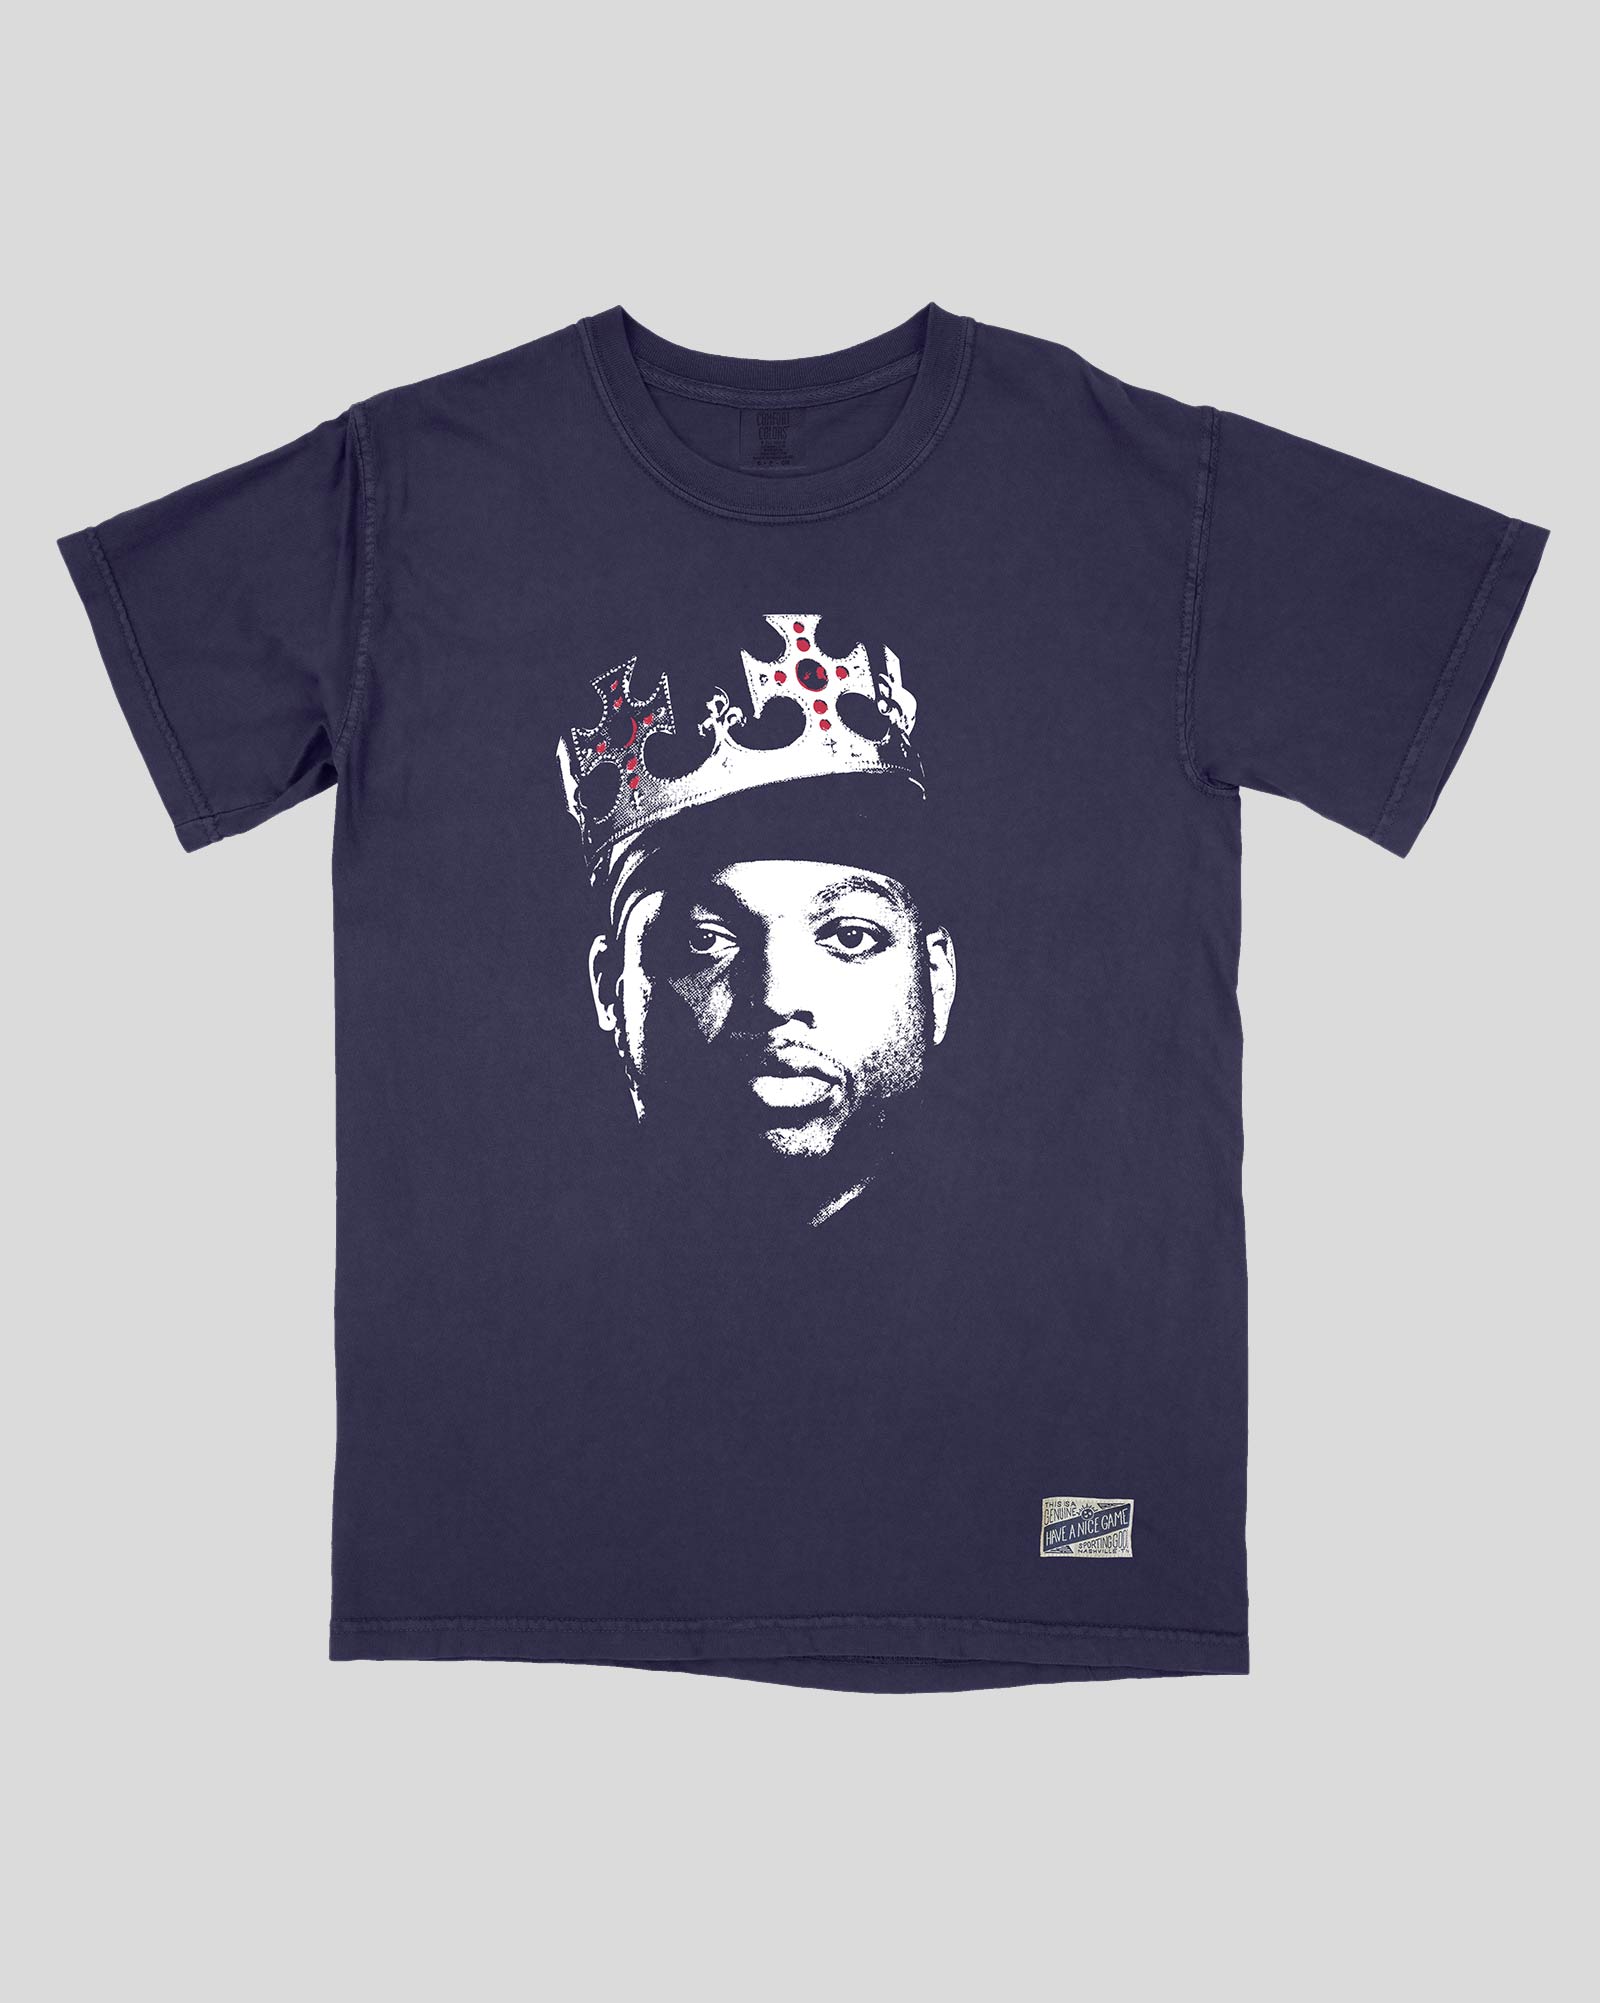 King of The South - Derrick Henry Shirt